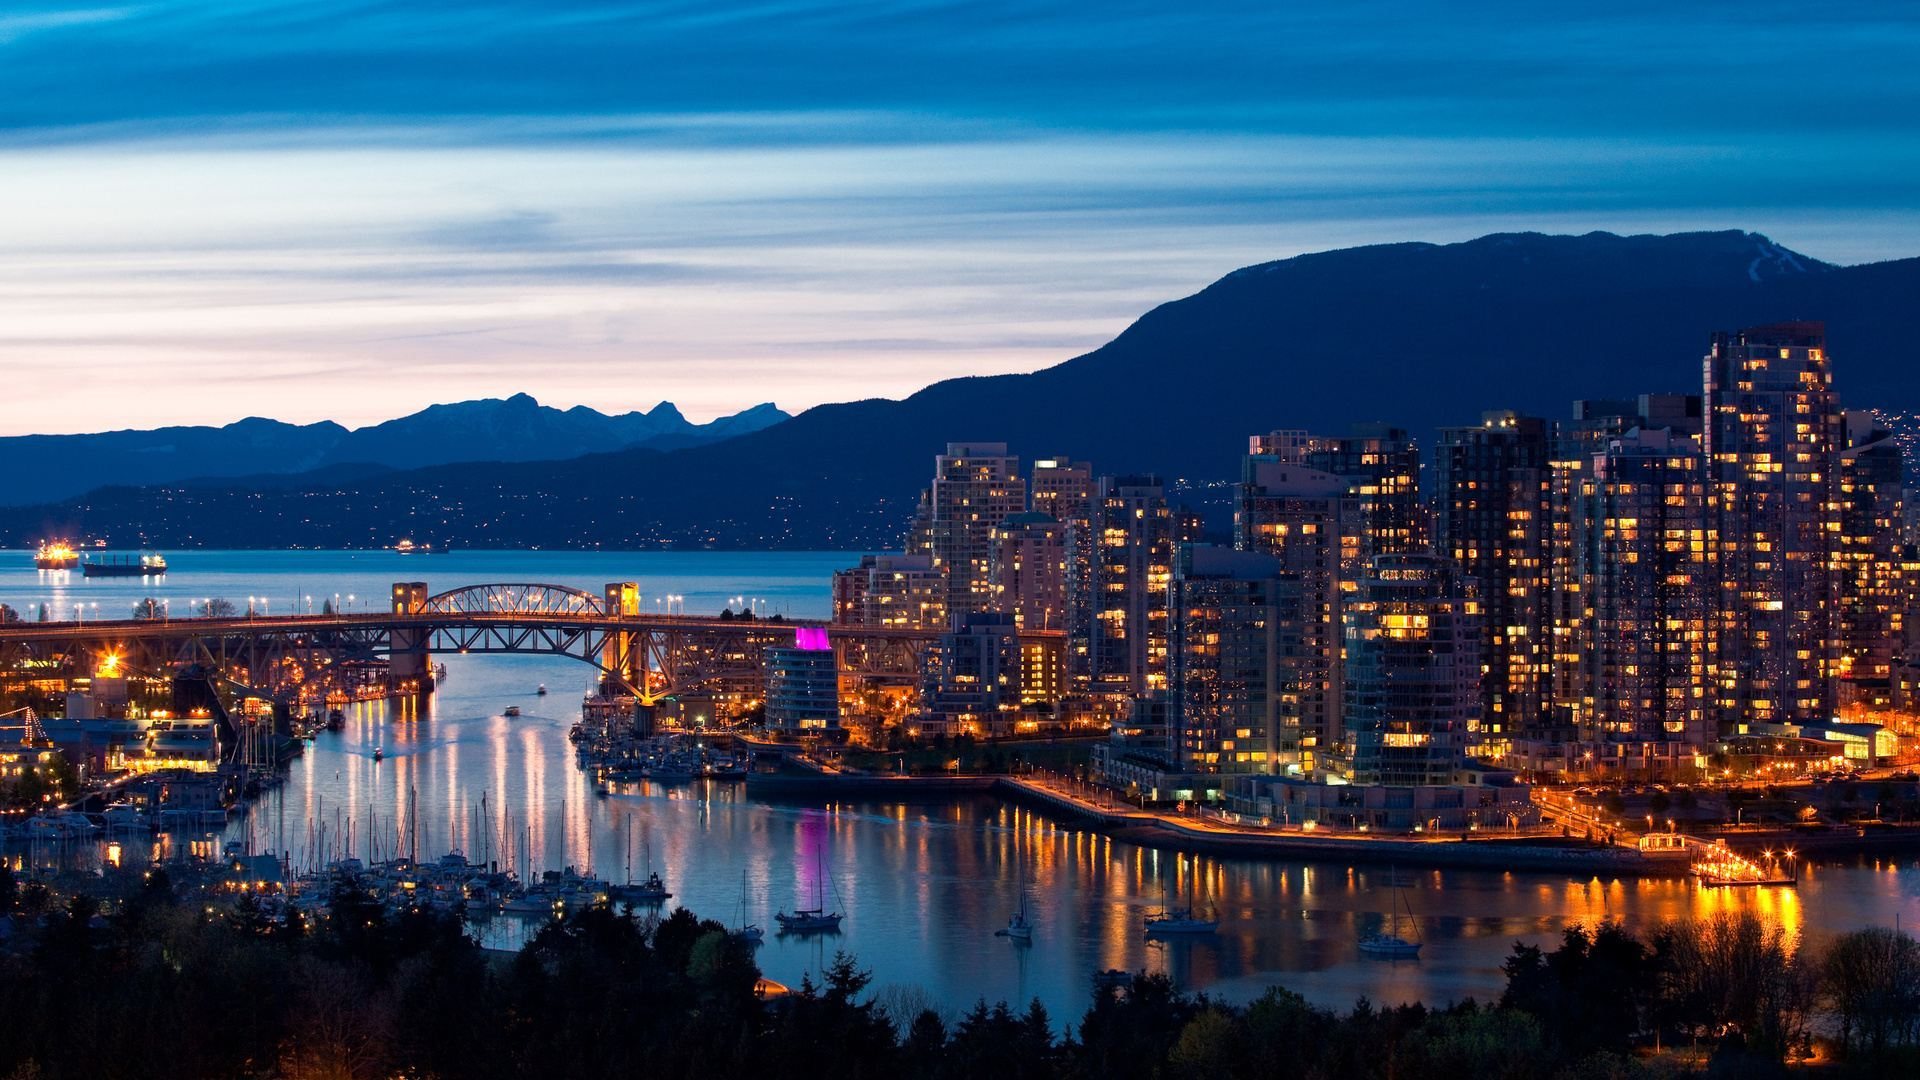 Wallpaper Vancouver - Wallpaper Pictures Gallery